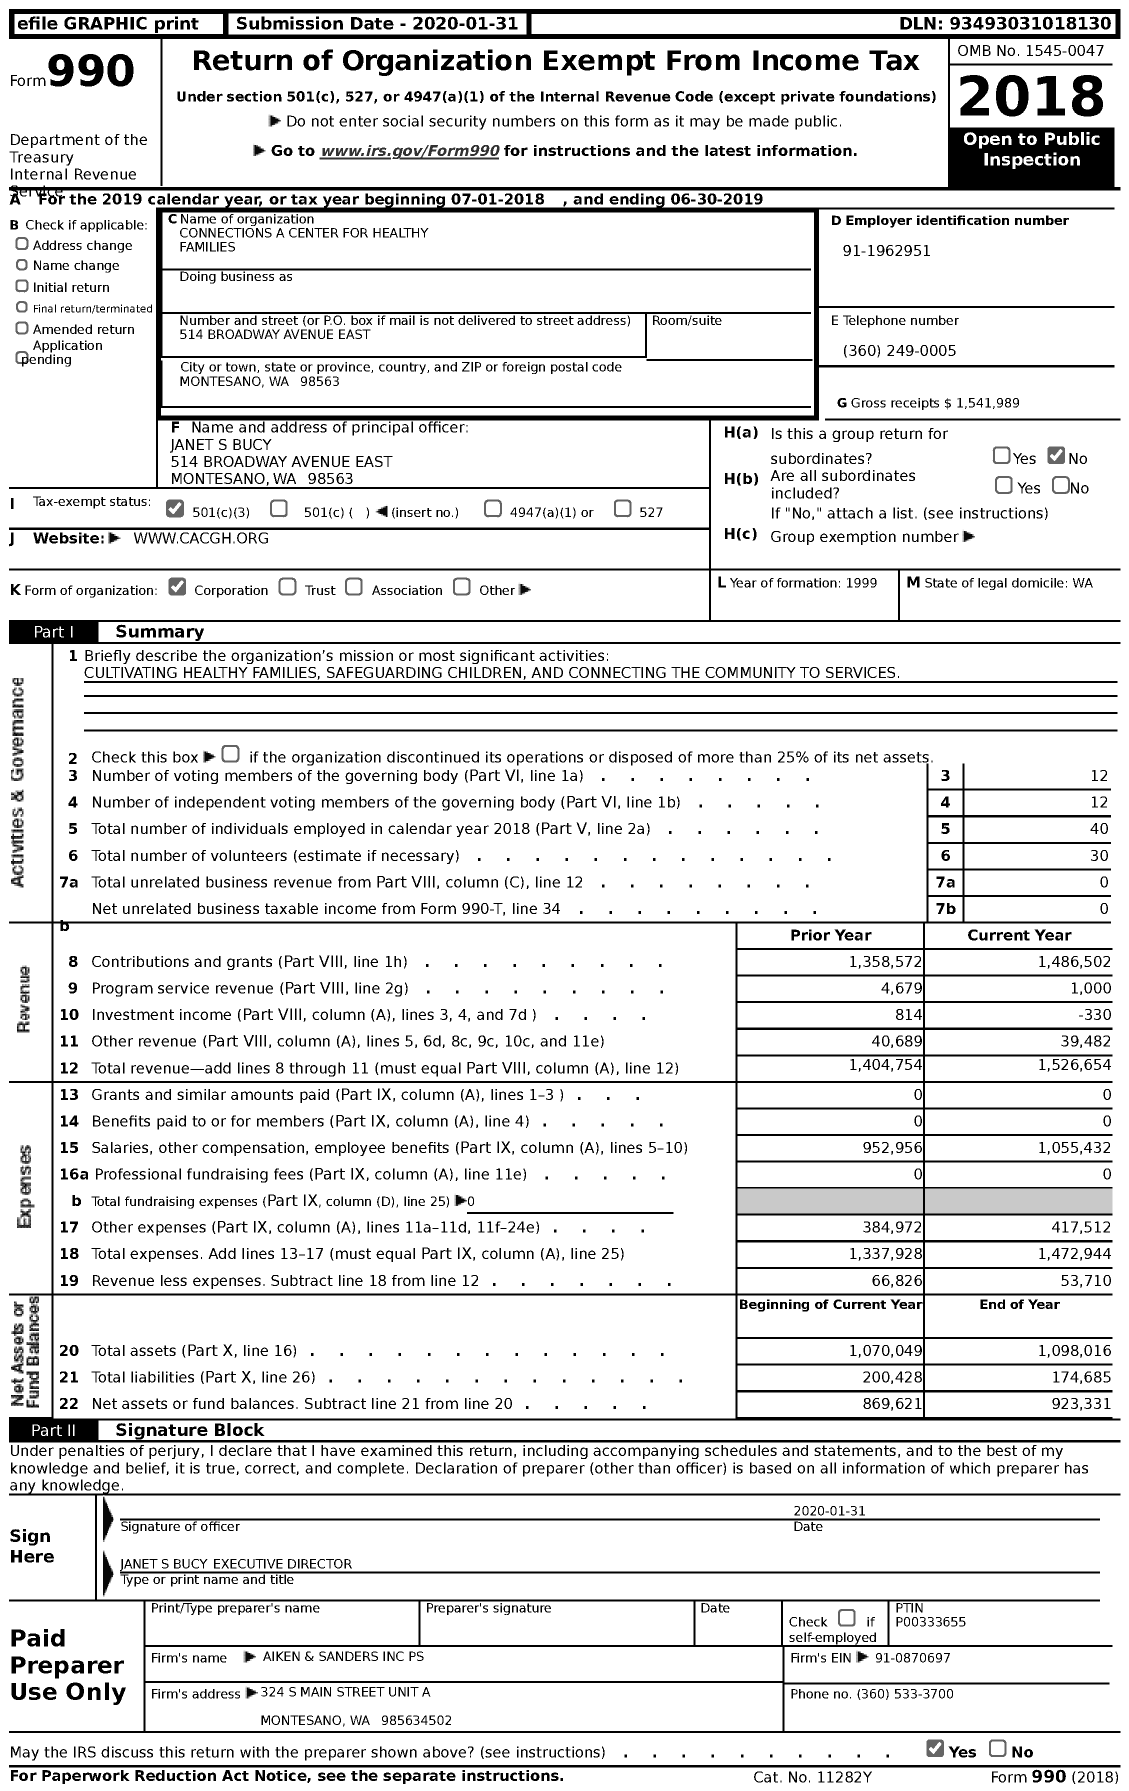 Image of first page of 2018 Form 990 for Connections A Center for Healthy Families